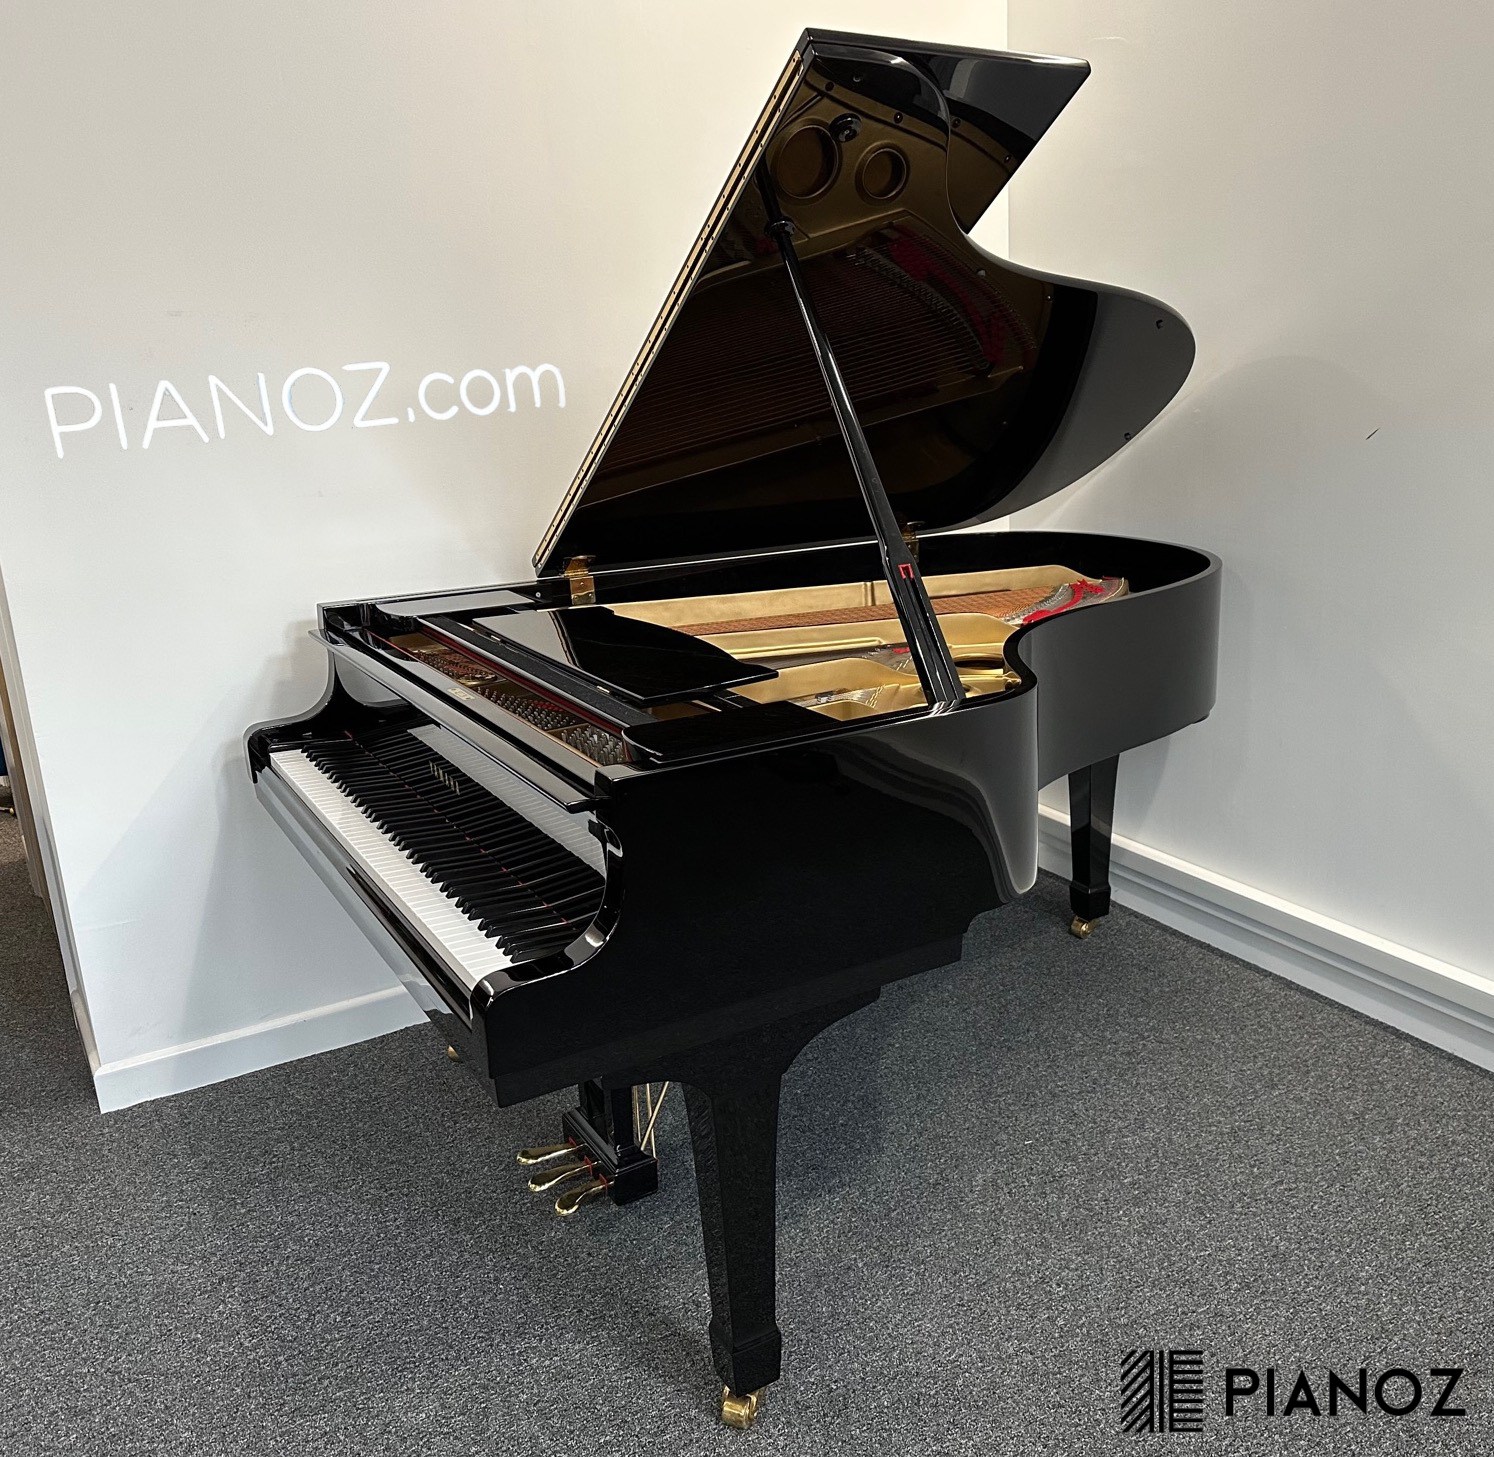 Yamaha G5 Grand Piano piano for sale in UK